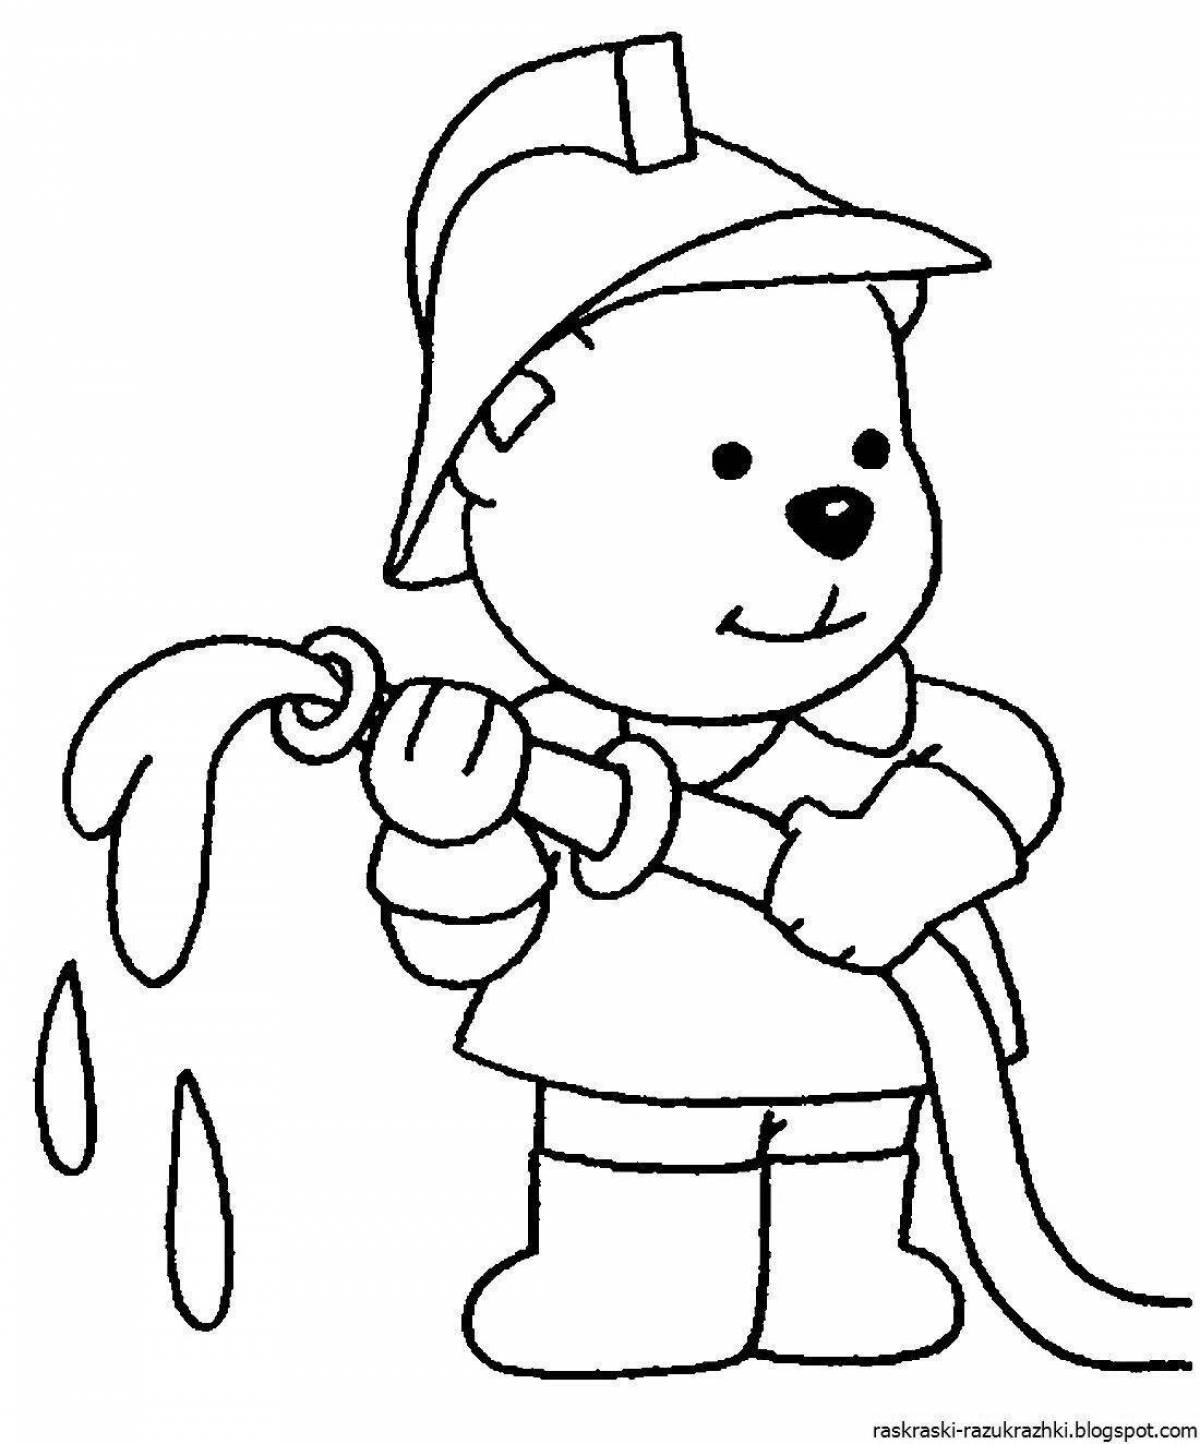 Colorful fire safety coloring page for 4-5 year olds